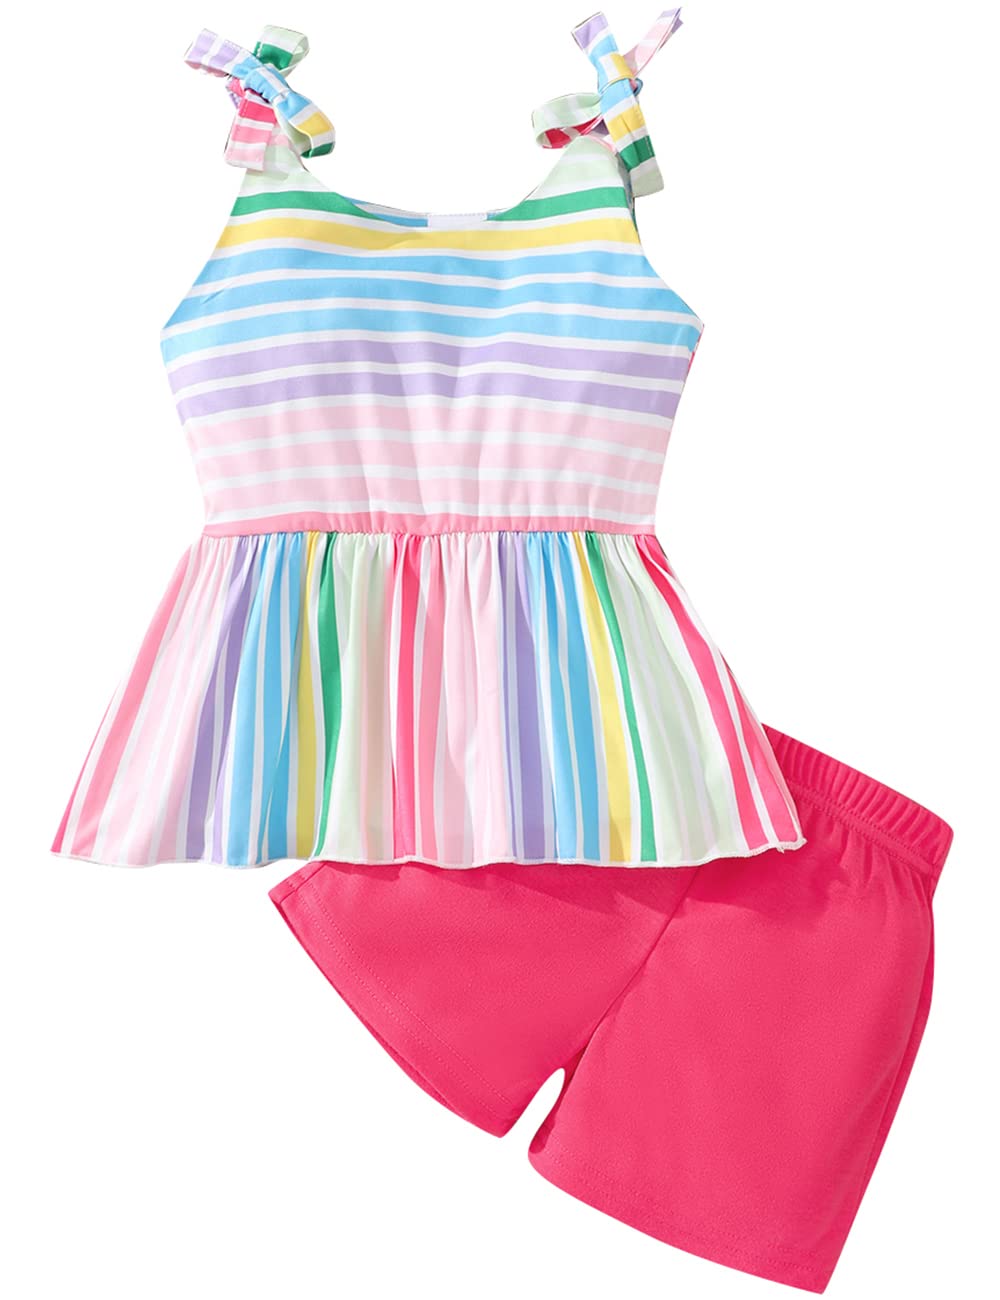 zarmfly Toddler Girls Summer Short Set Outfit Rainbow Sleeveless Tank Tops and Shorts 2PC Clothing Set 5t